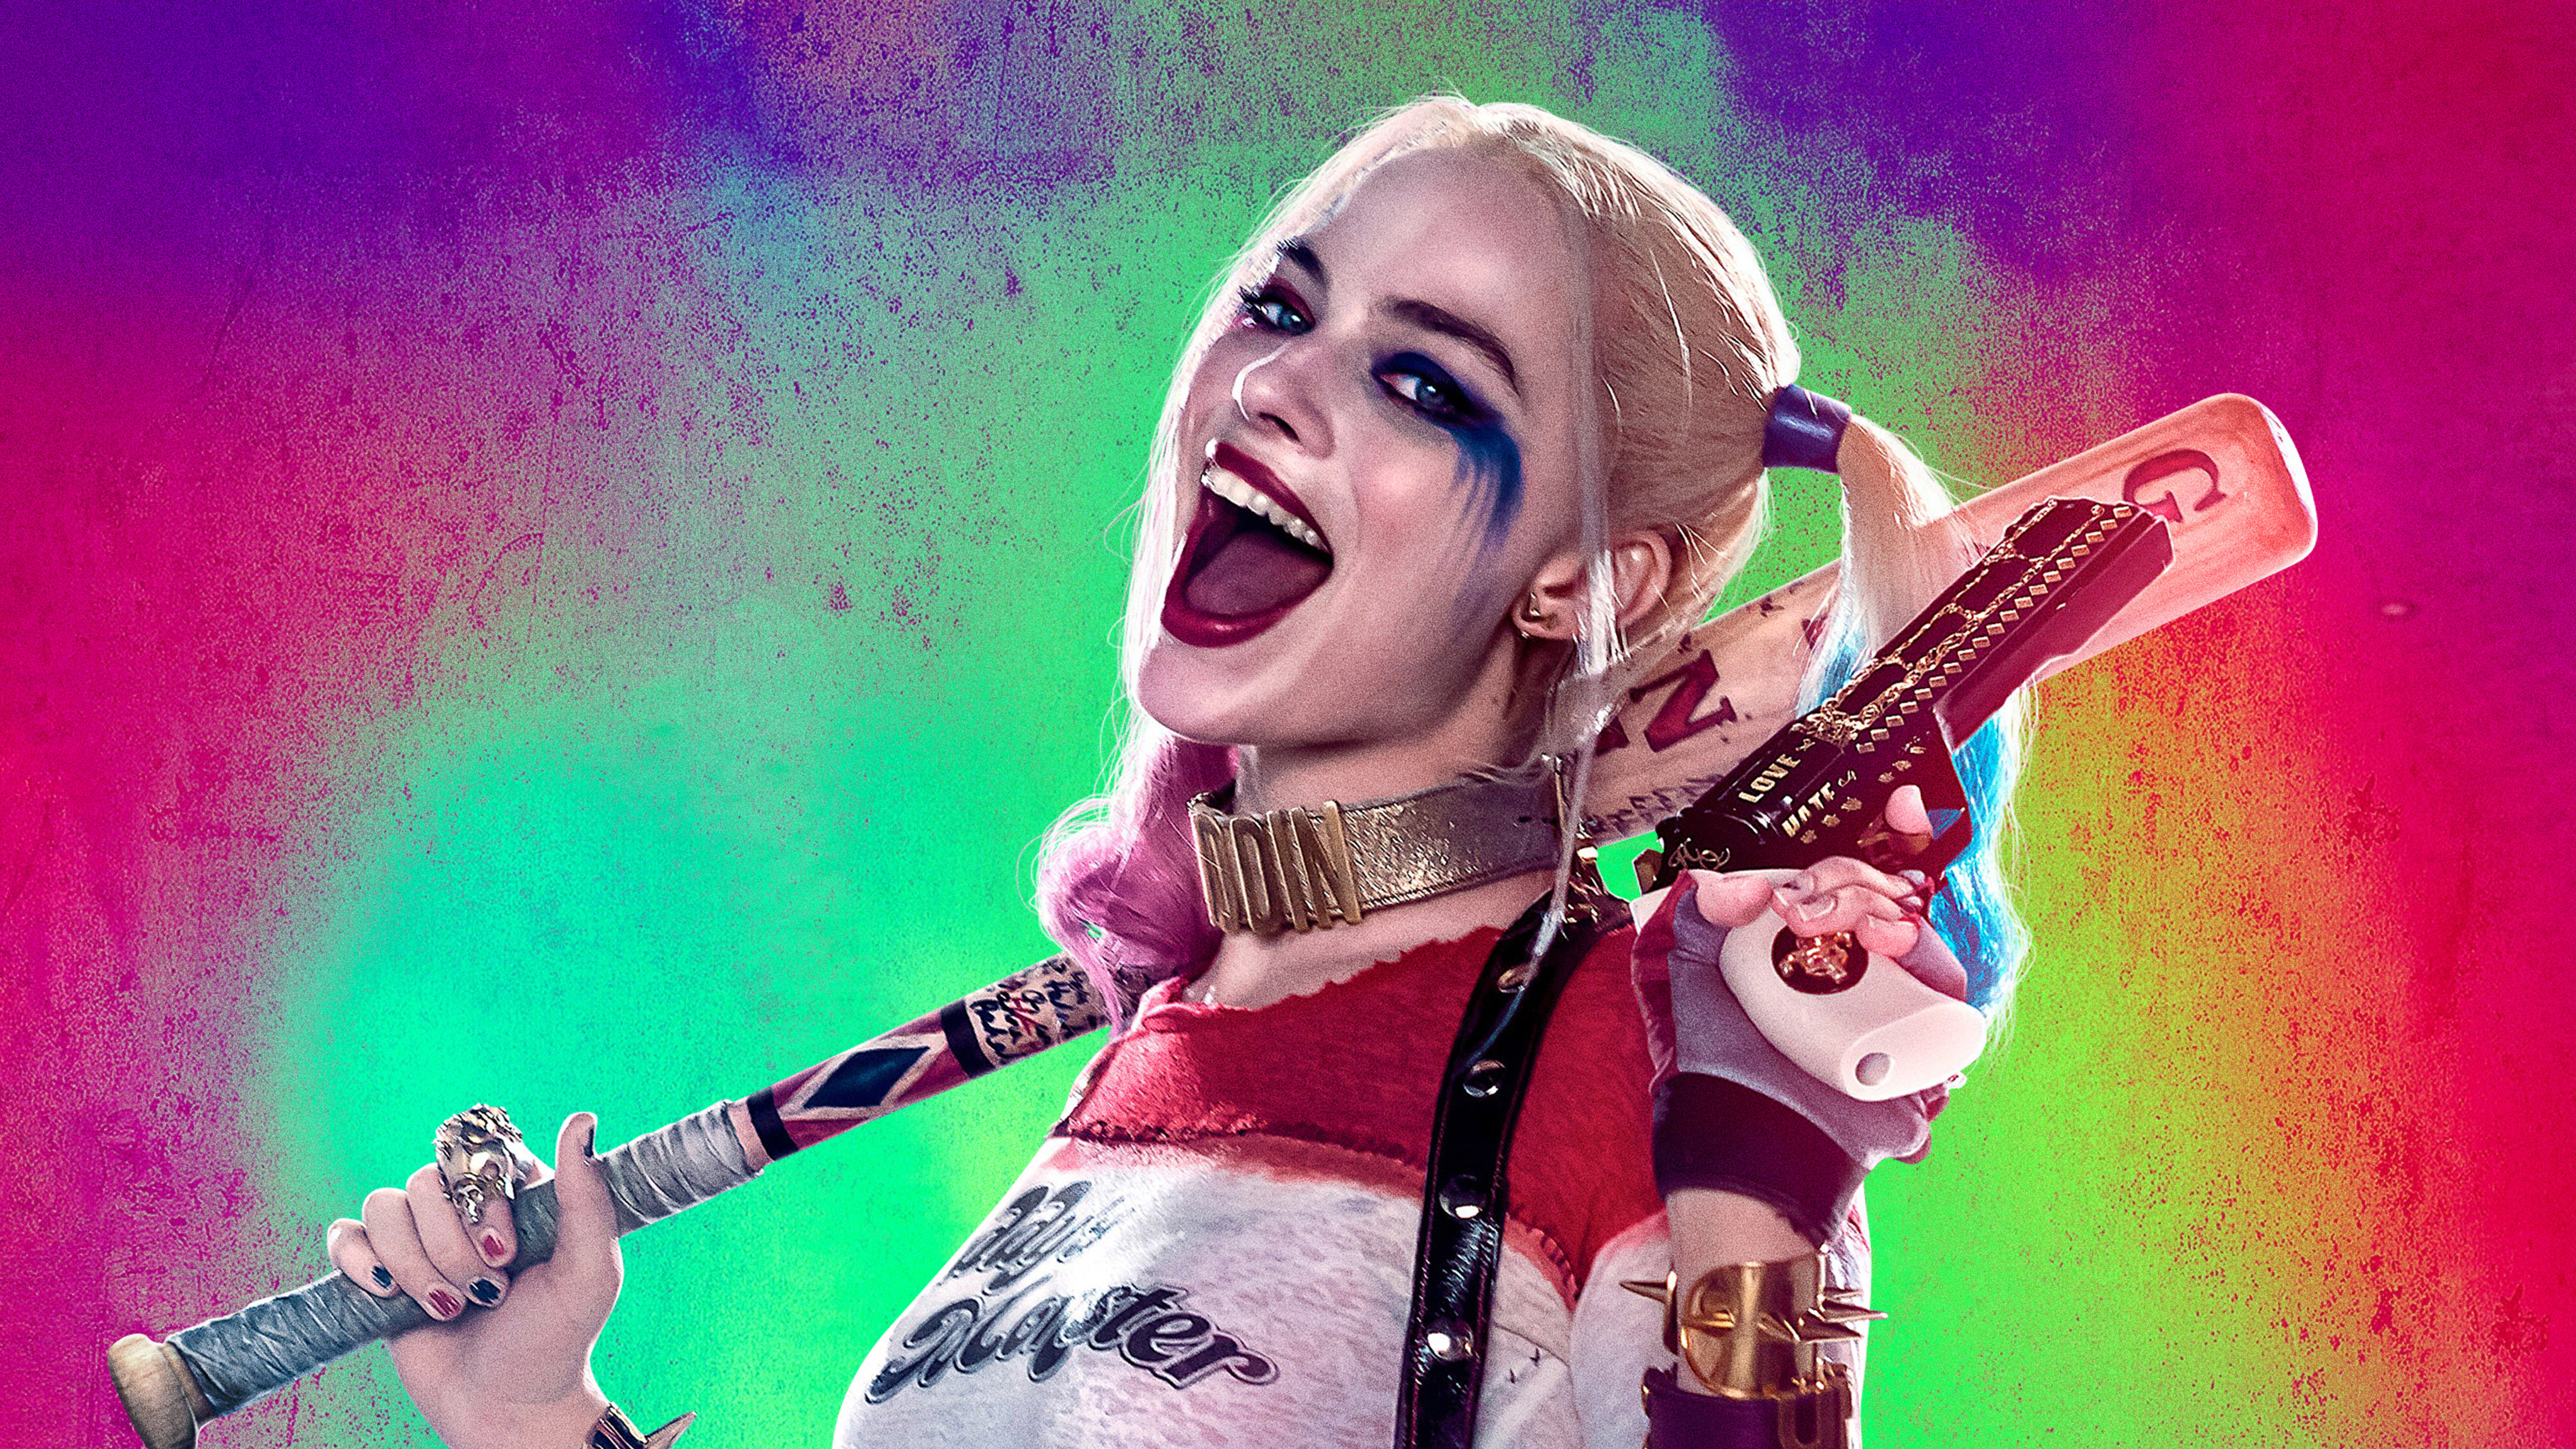 harley quinn 8k hd movies 4k wallpapers images backgrounds photos and pictures hdqwalls